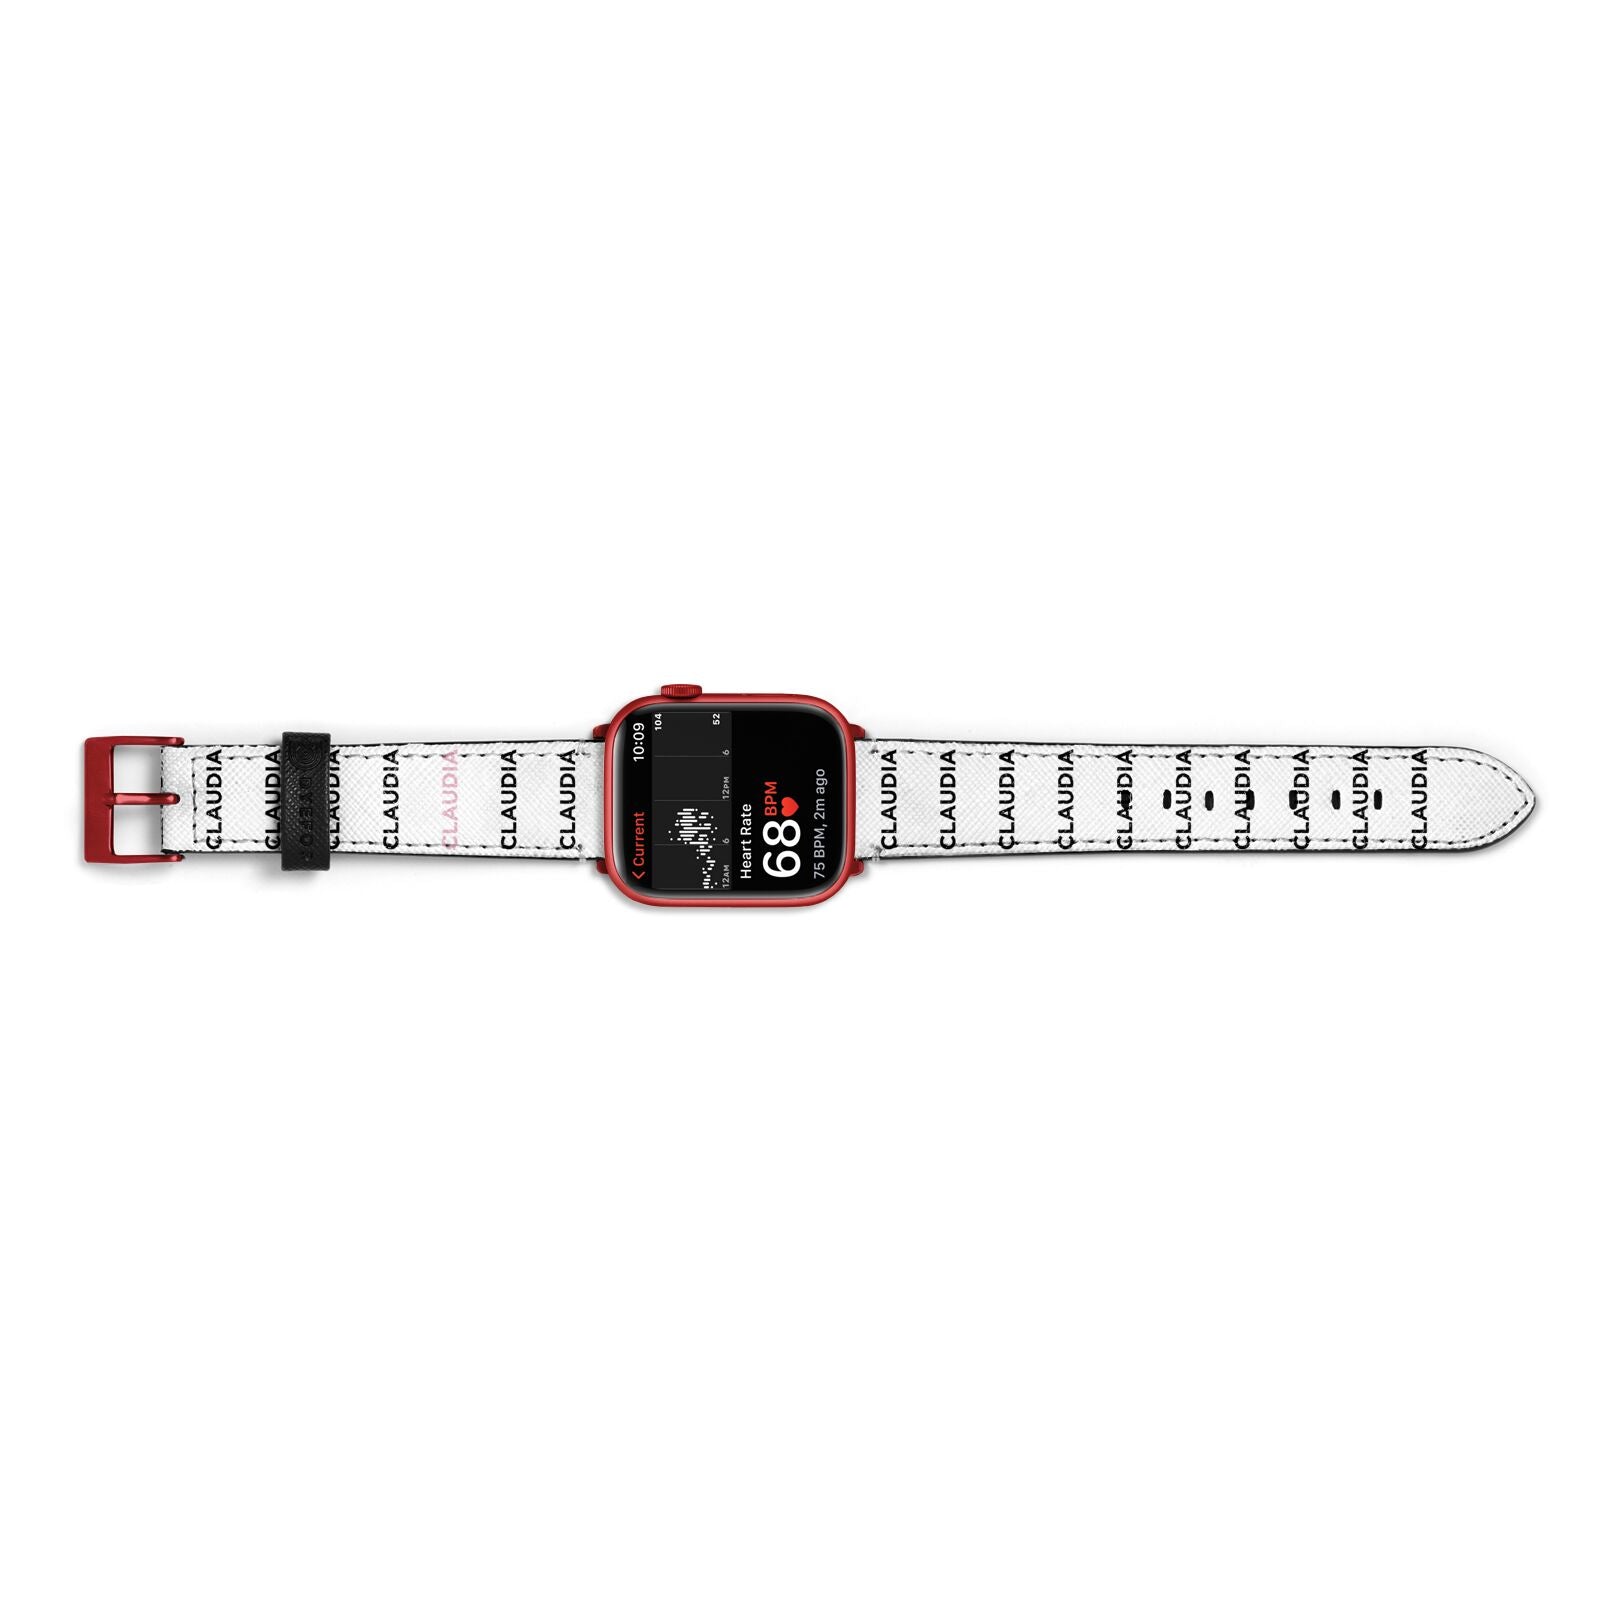 Custom Name Repeat Apple Watch Strap Size 38mm Landscape Image Red Hardware